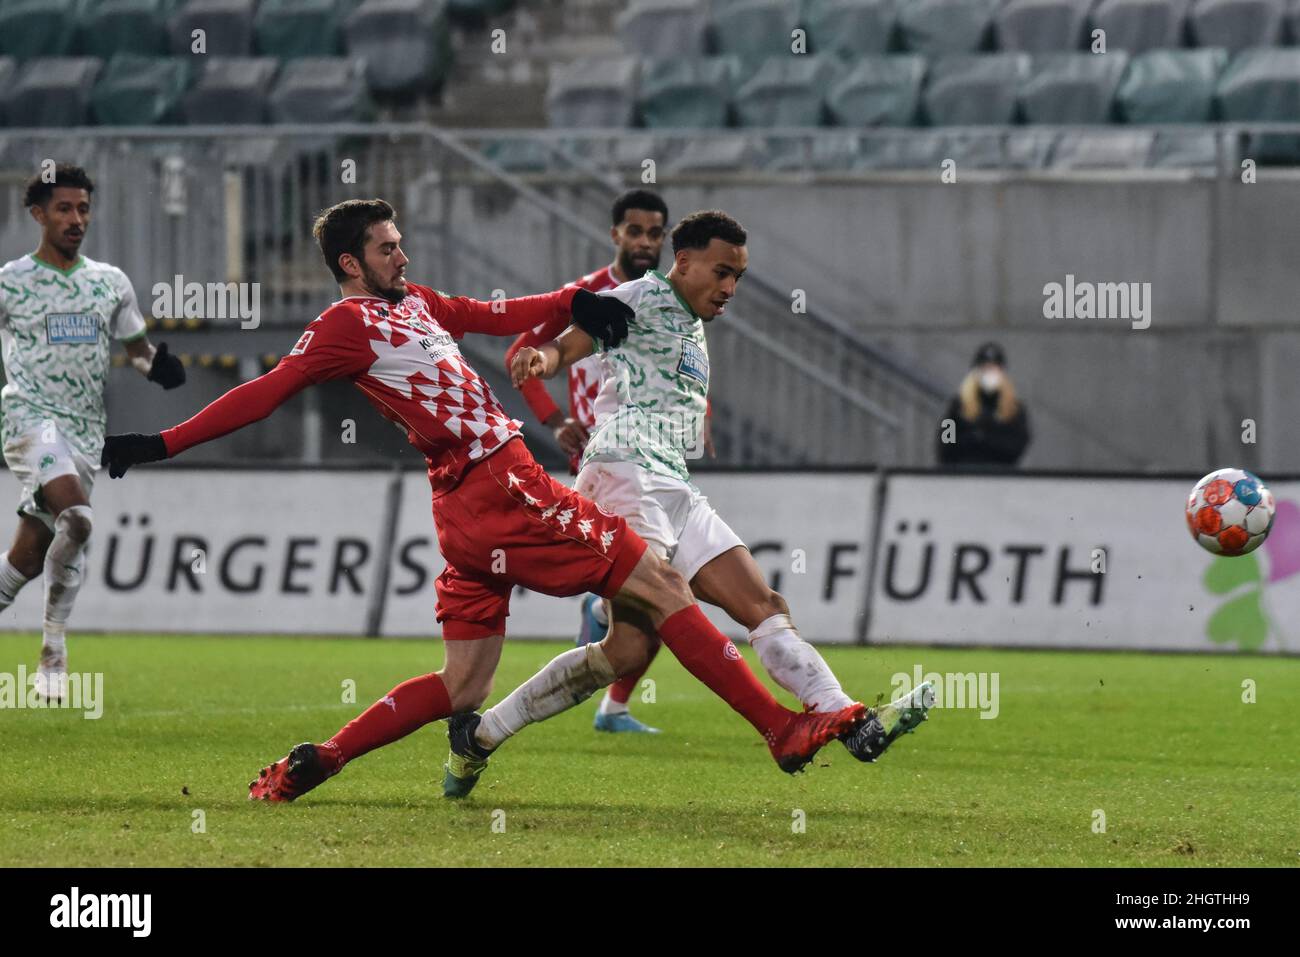 Germany ,Fuerth, Sportpark Ronhof Thomas Sommer - 22 Jan 2022 - Fussball, 1.Bundesliga - SpVgg Greuther Fuerth vs. FSV Mainz 05  Image: (fLTR) Stefan Bell (Mainz, 16) defening Jamie Leweling (SpVgg Greuther Fürth,40) as he takes a shot on goal.  DFL regulations prohibit any use of photographs as image sequences and or quasi-video Stock Photo